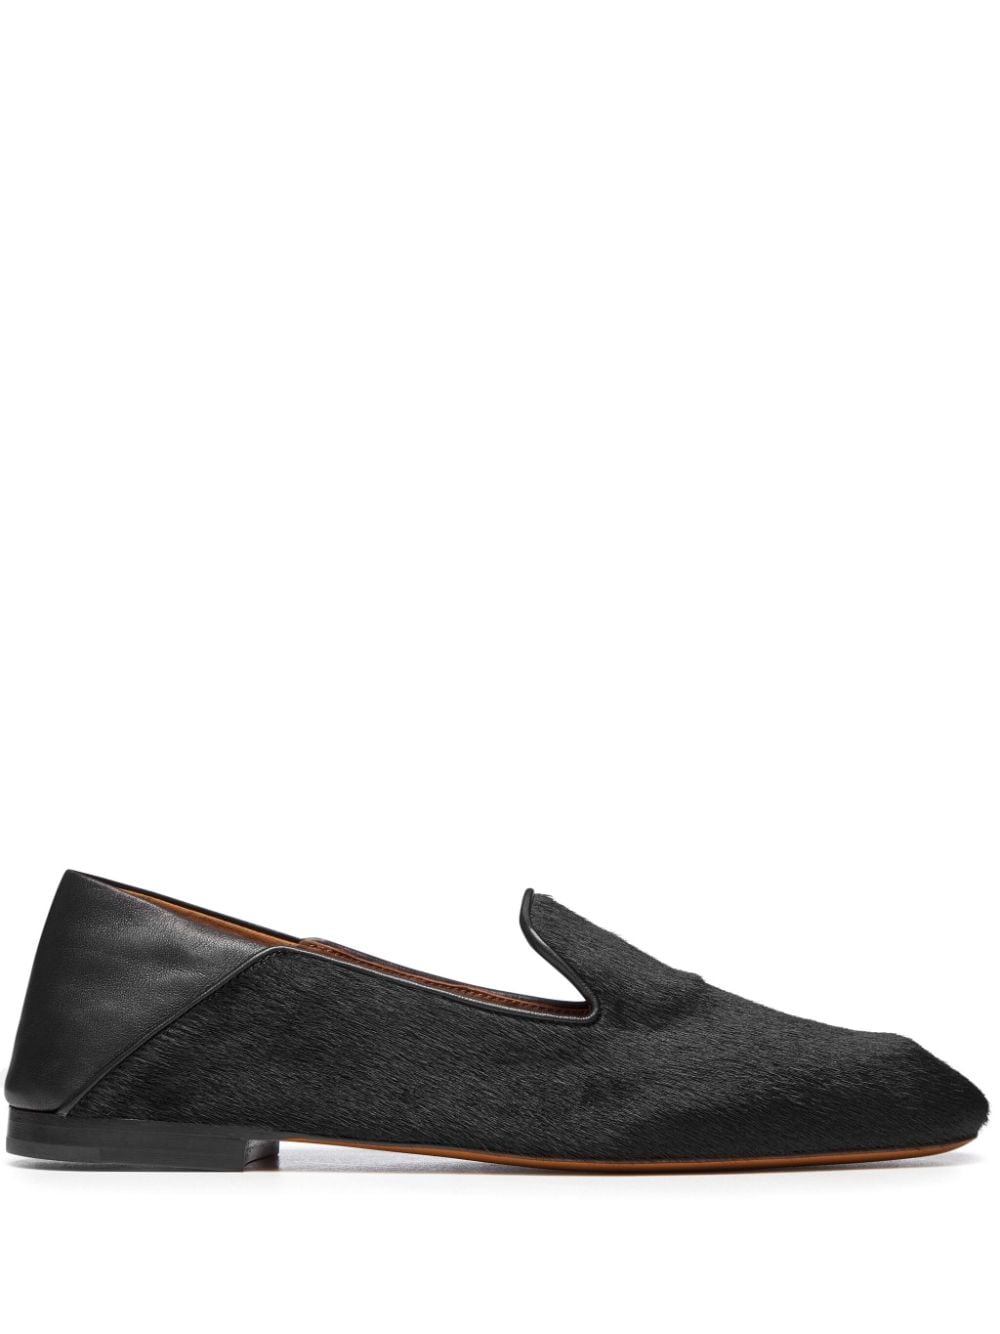 Symphony leather flat slippers